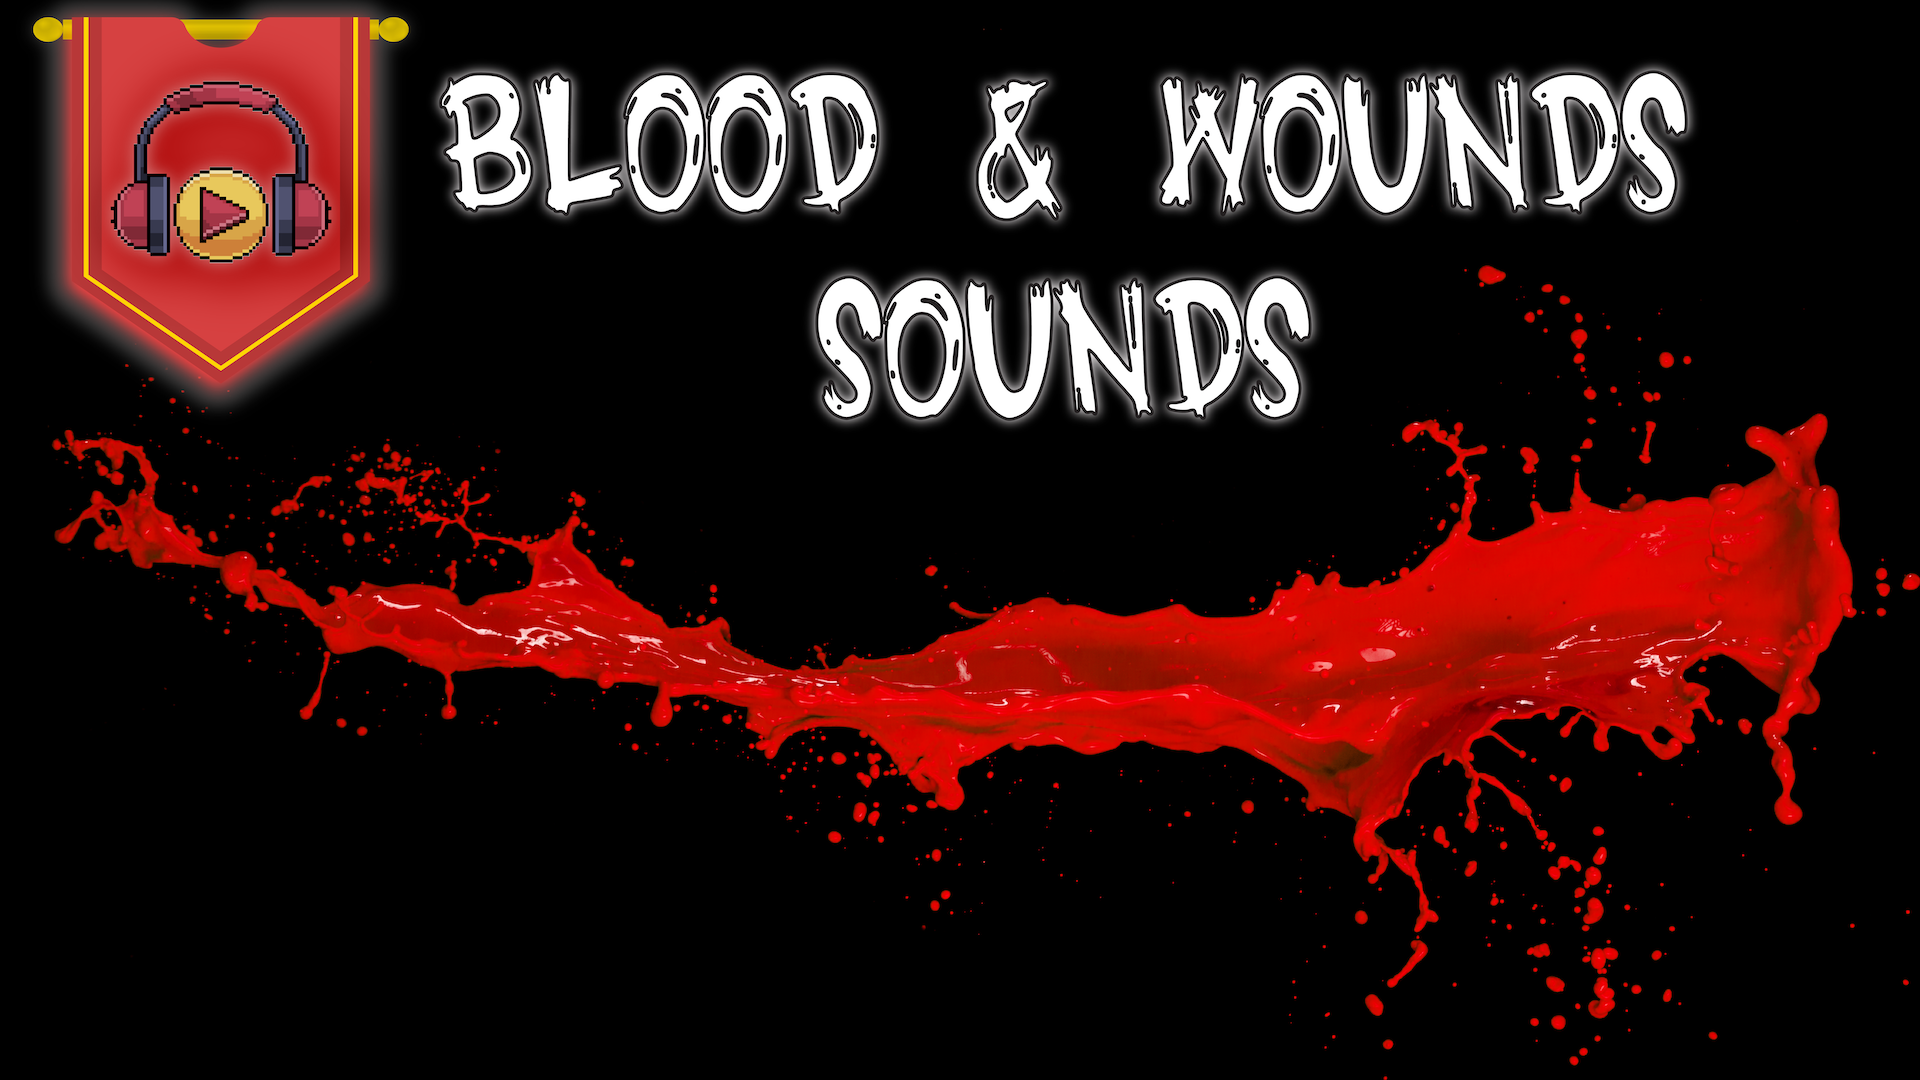 Blood & Wounds Sounds